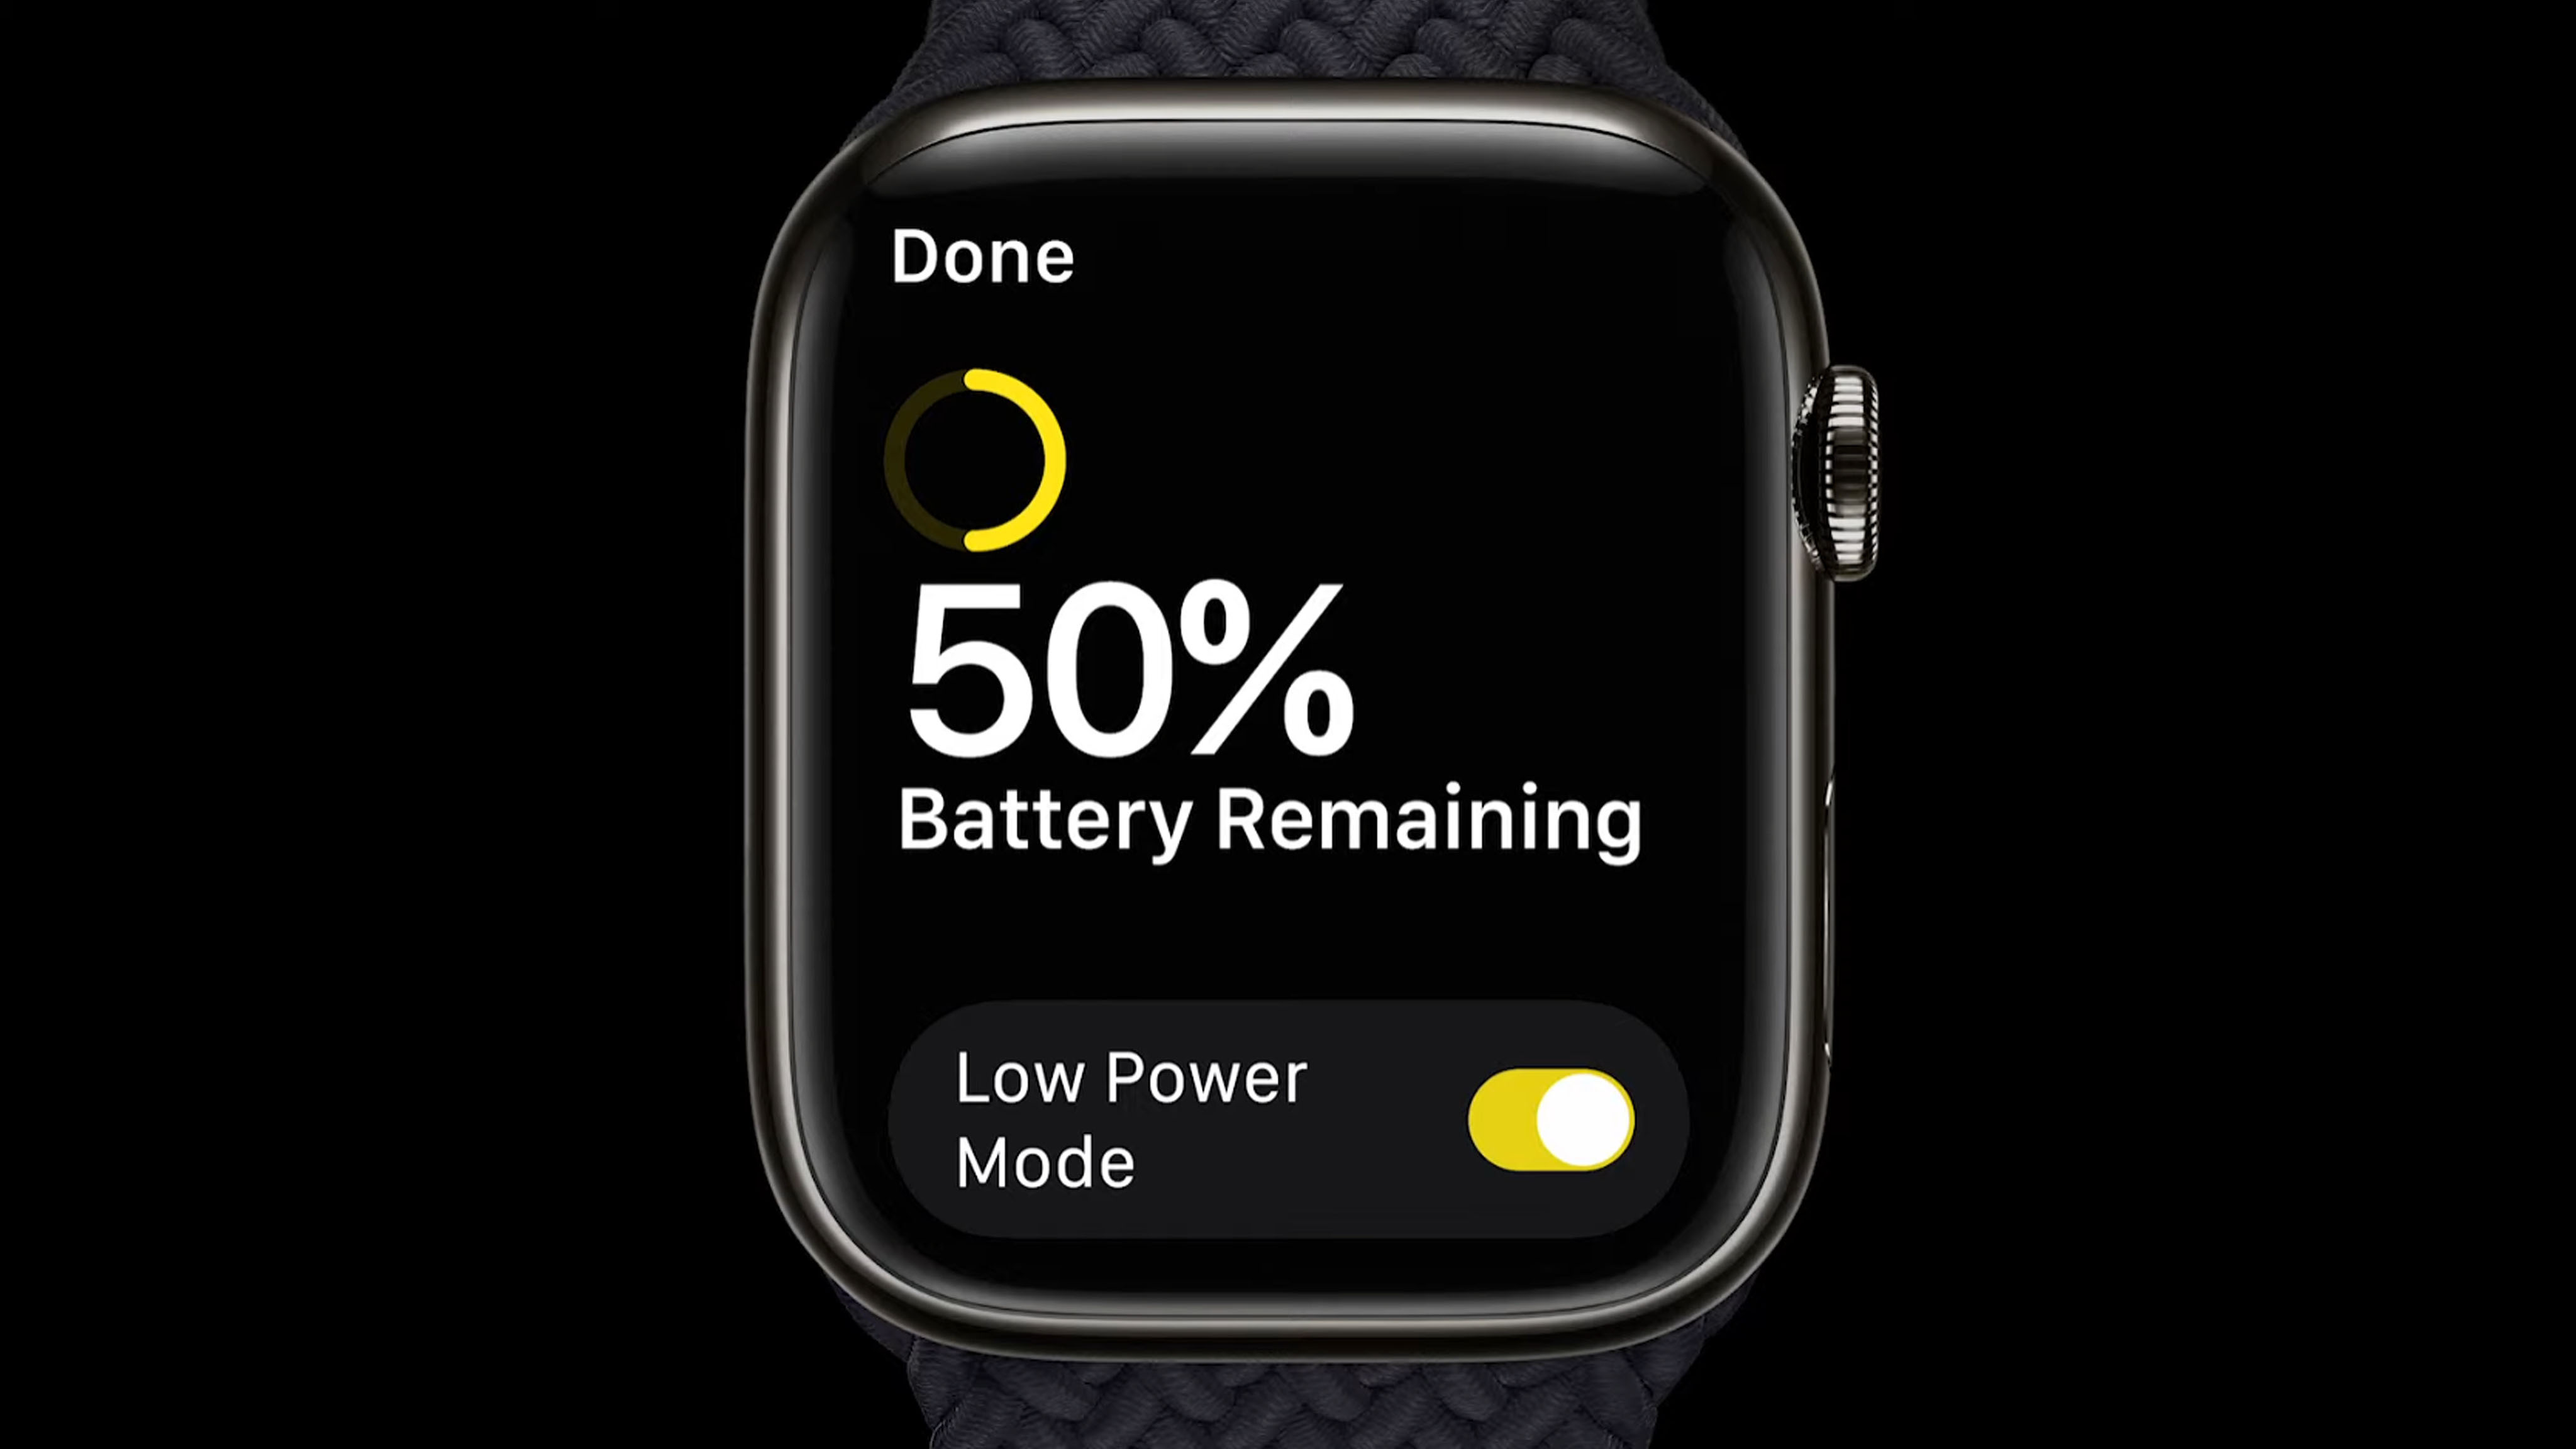 Apple just announced a massive upgrade for Apple Watch — Low Power Mode